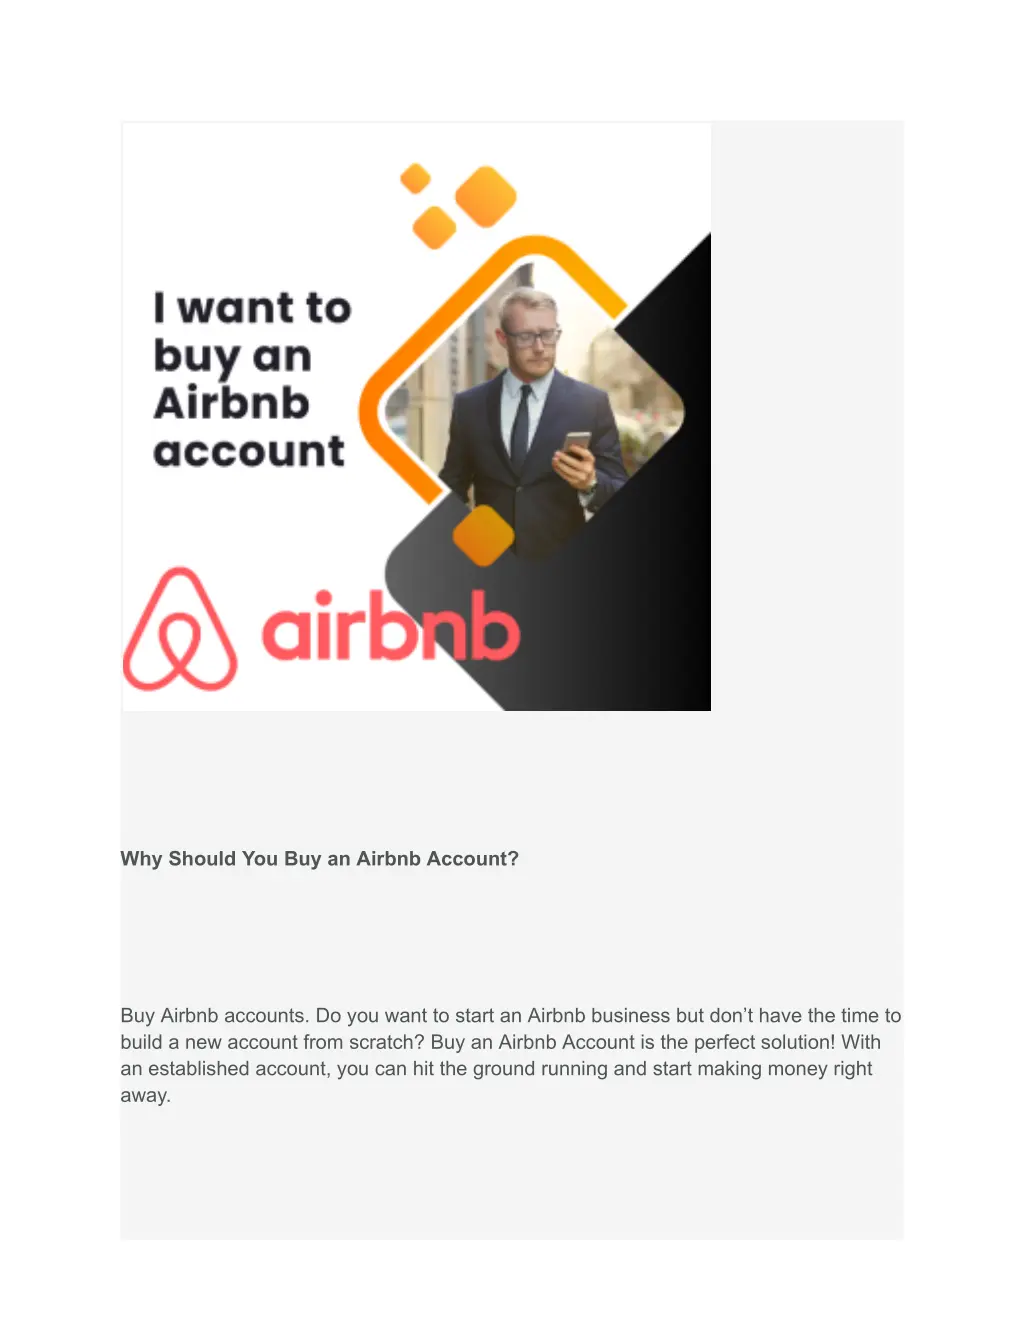 why should you buy an airbnb account